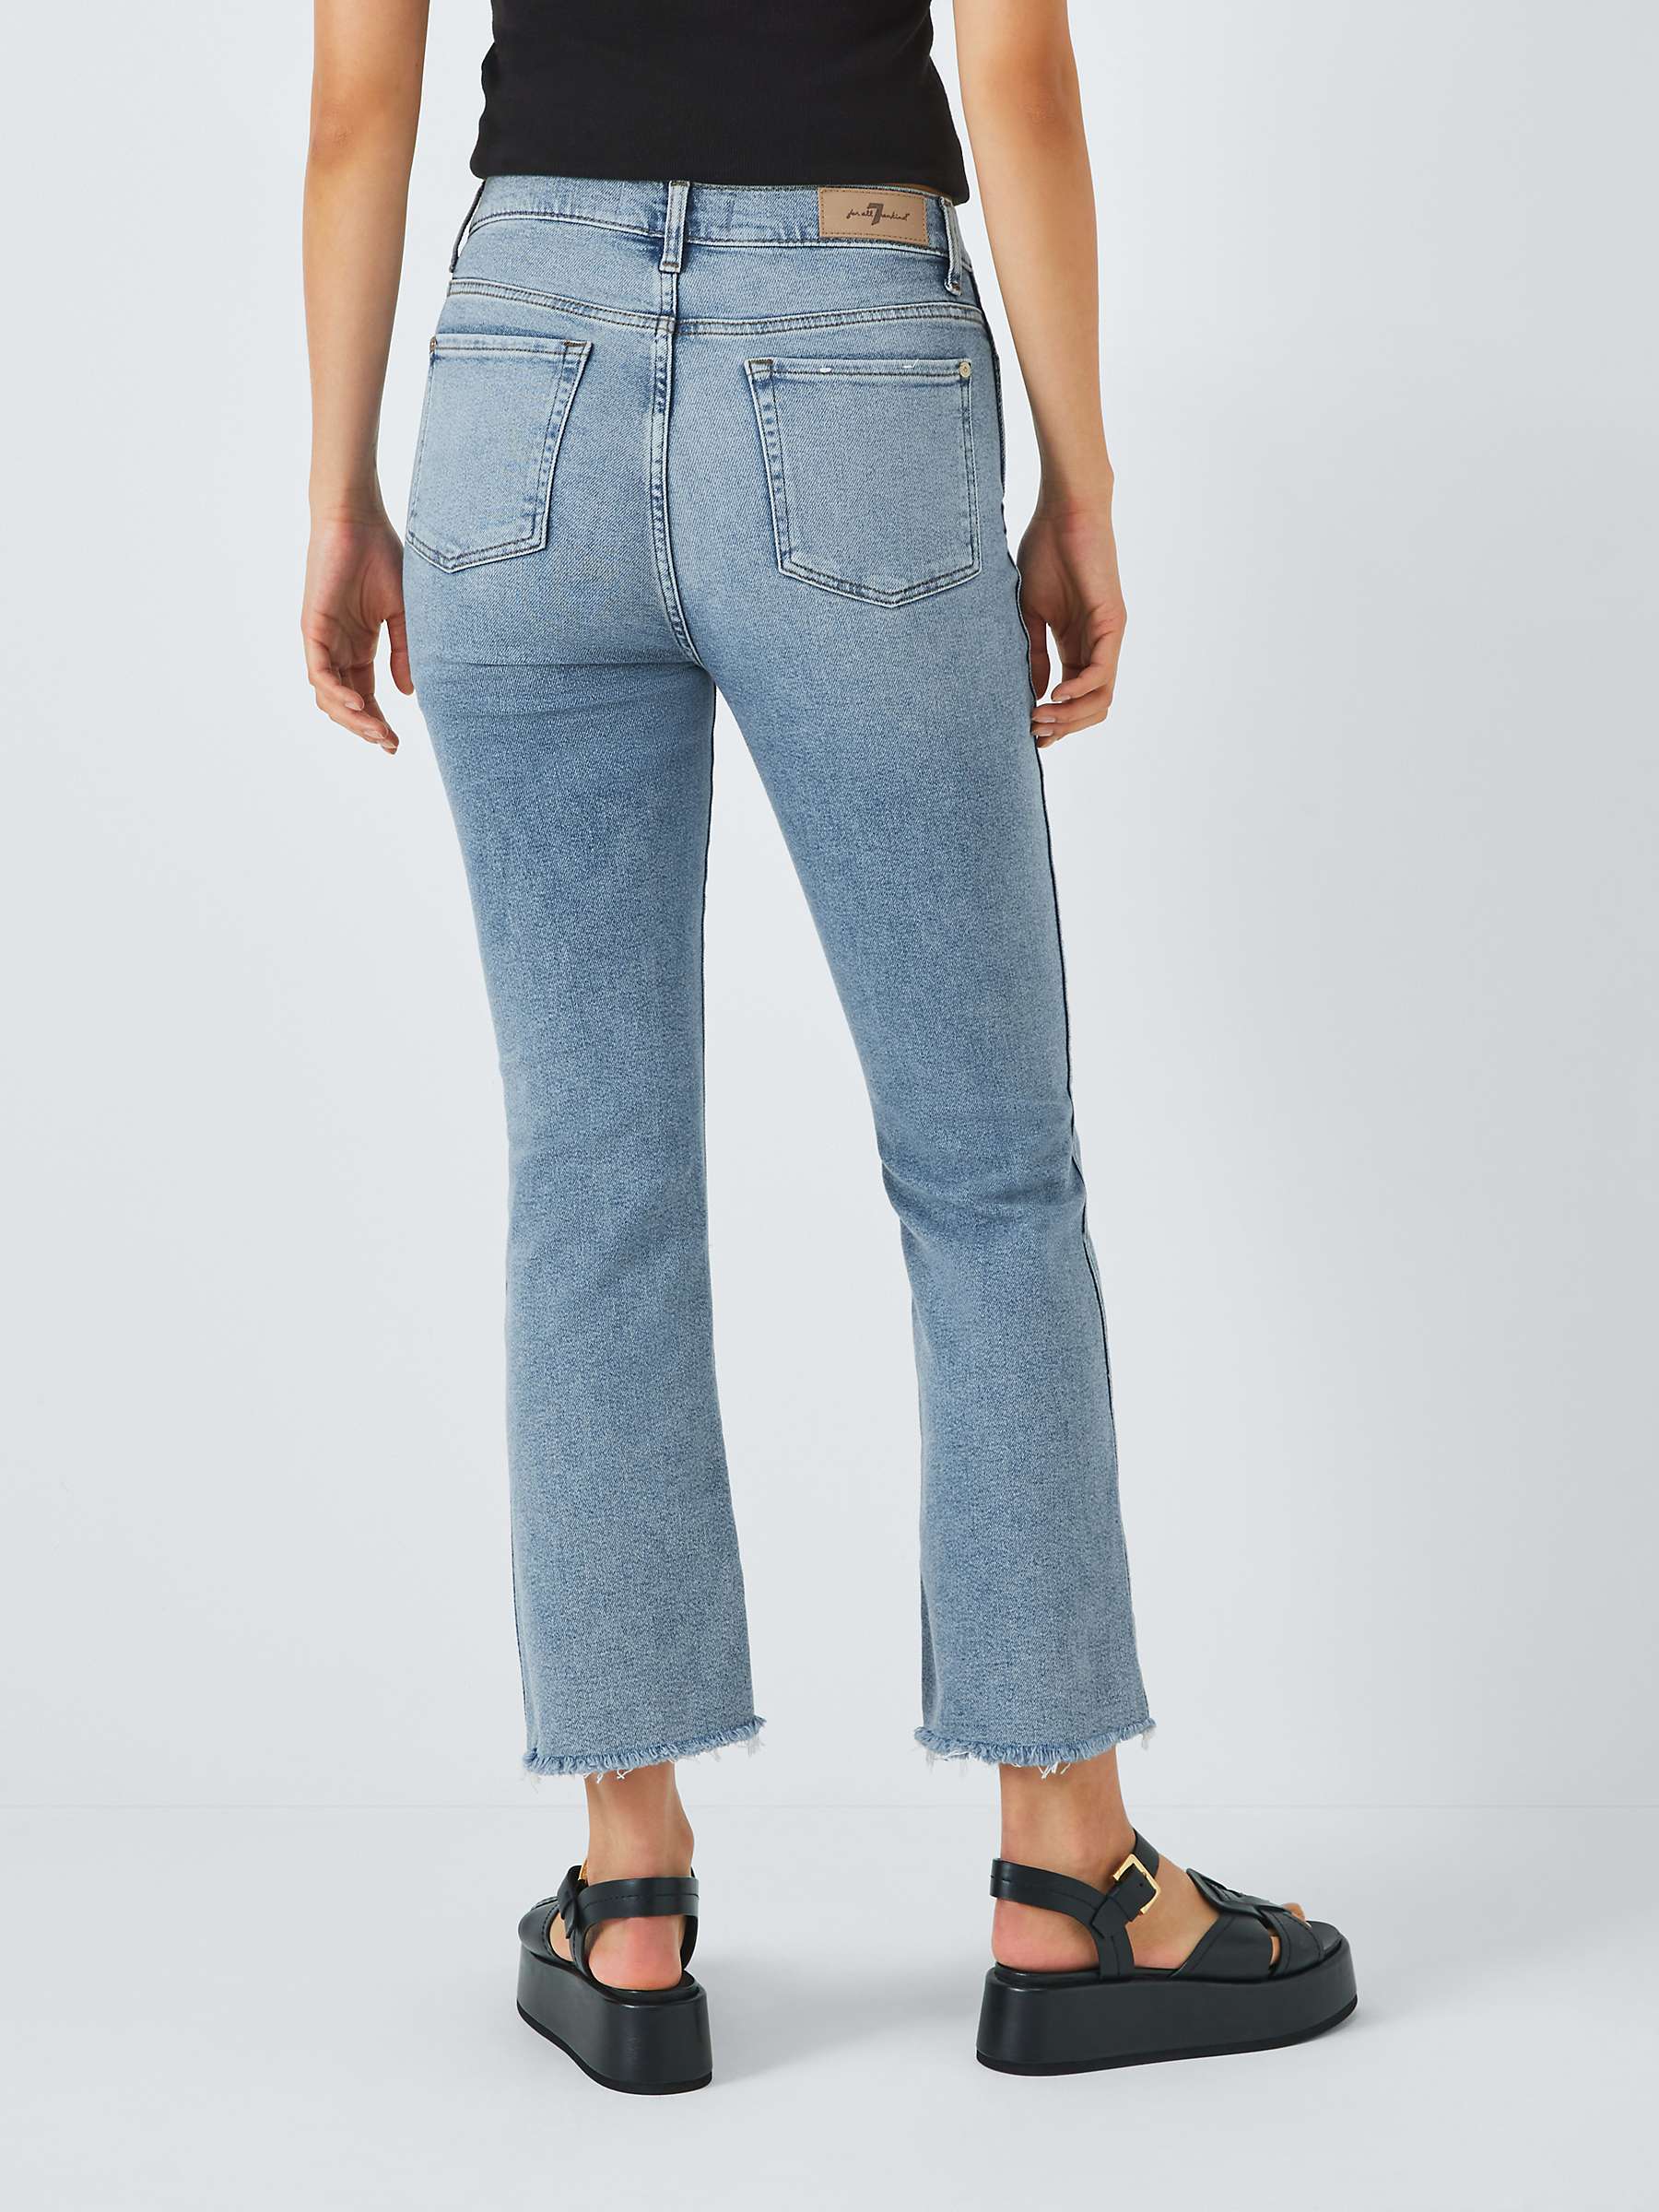 Buy 7 For All Mankind High Waist Slim Kick Jeans, Luxe Vintage Love Soul Online at johnlewis.com